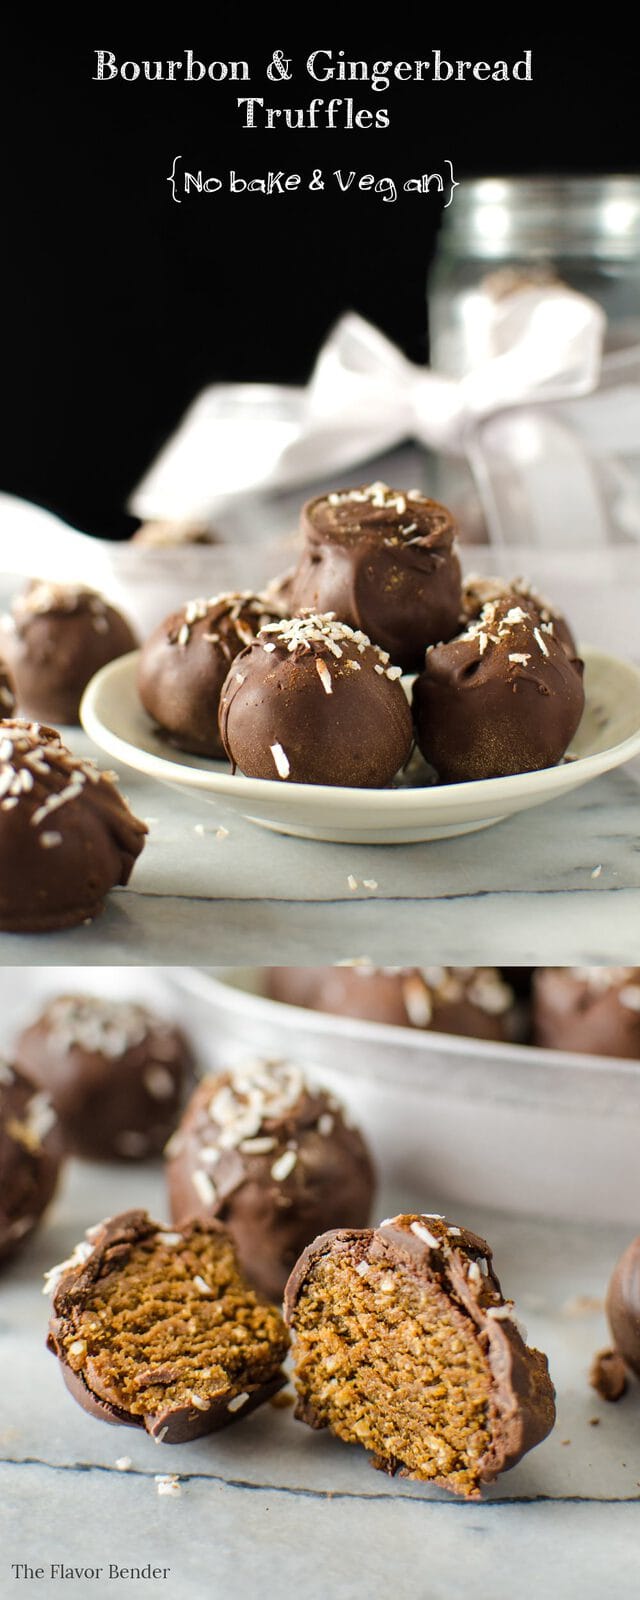 Bourbon Gingerbread Truffles covered in chocolate - These are delicious and Vegan and No-bake! You can make these gluten free, with GF gingersnap cookies.